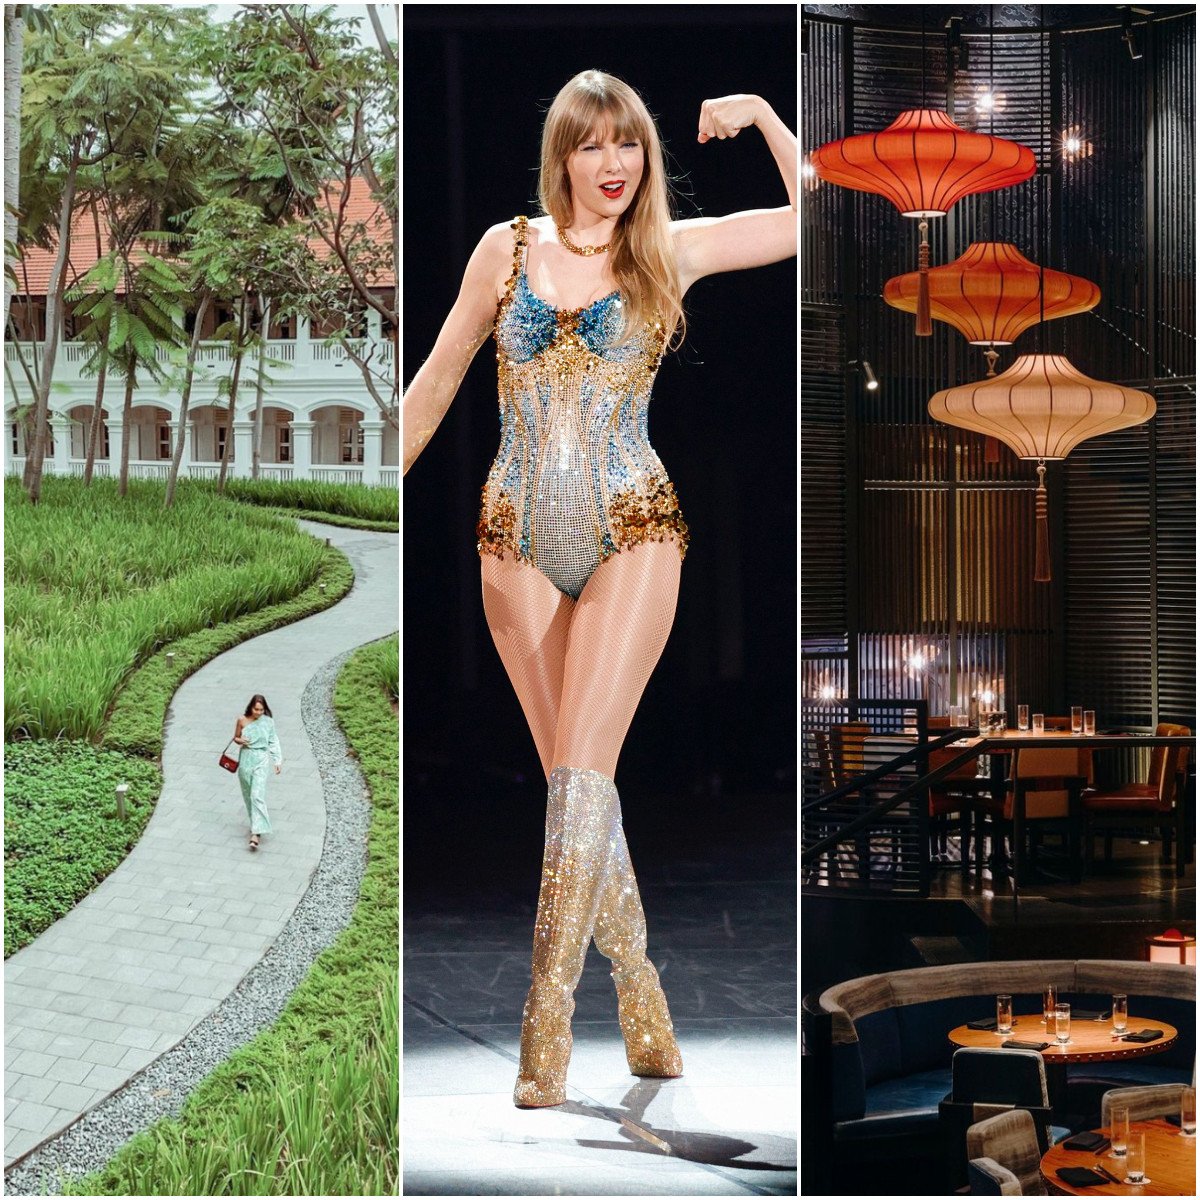 Pop star Taylor Swift just performed sold-out shows in Australia and Singapore – so where did she stay and visit when she was in the region? Photos: @capellasingapore, @komasingapore/Instagram; TNS